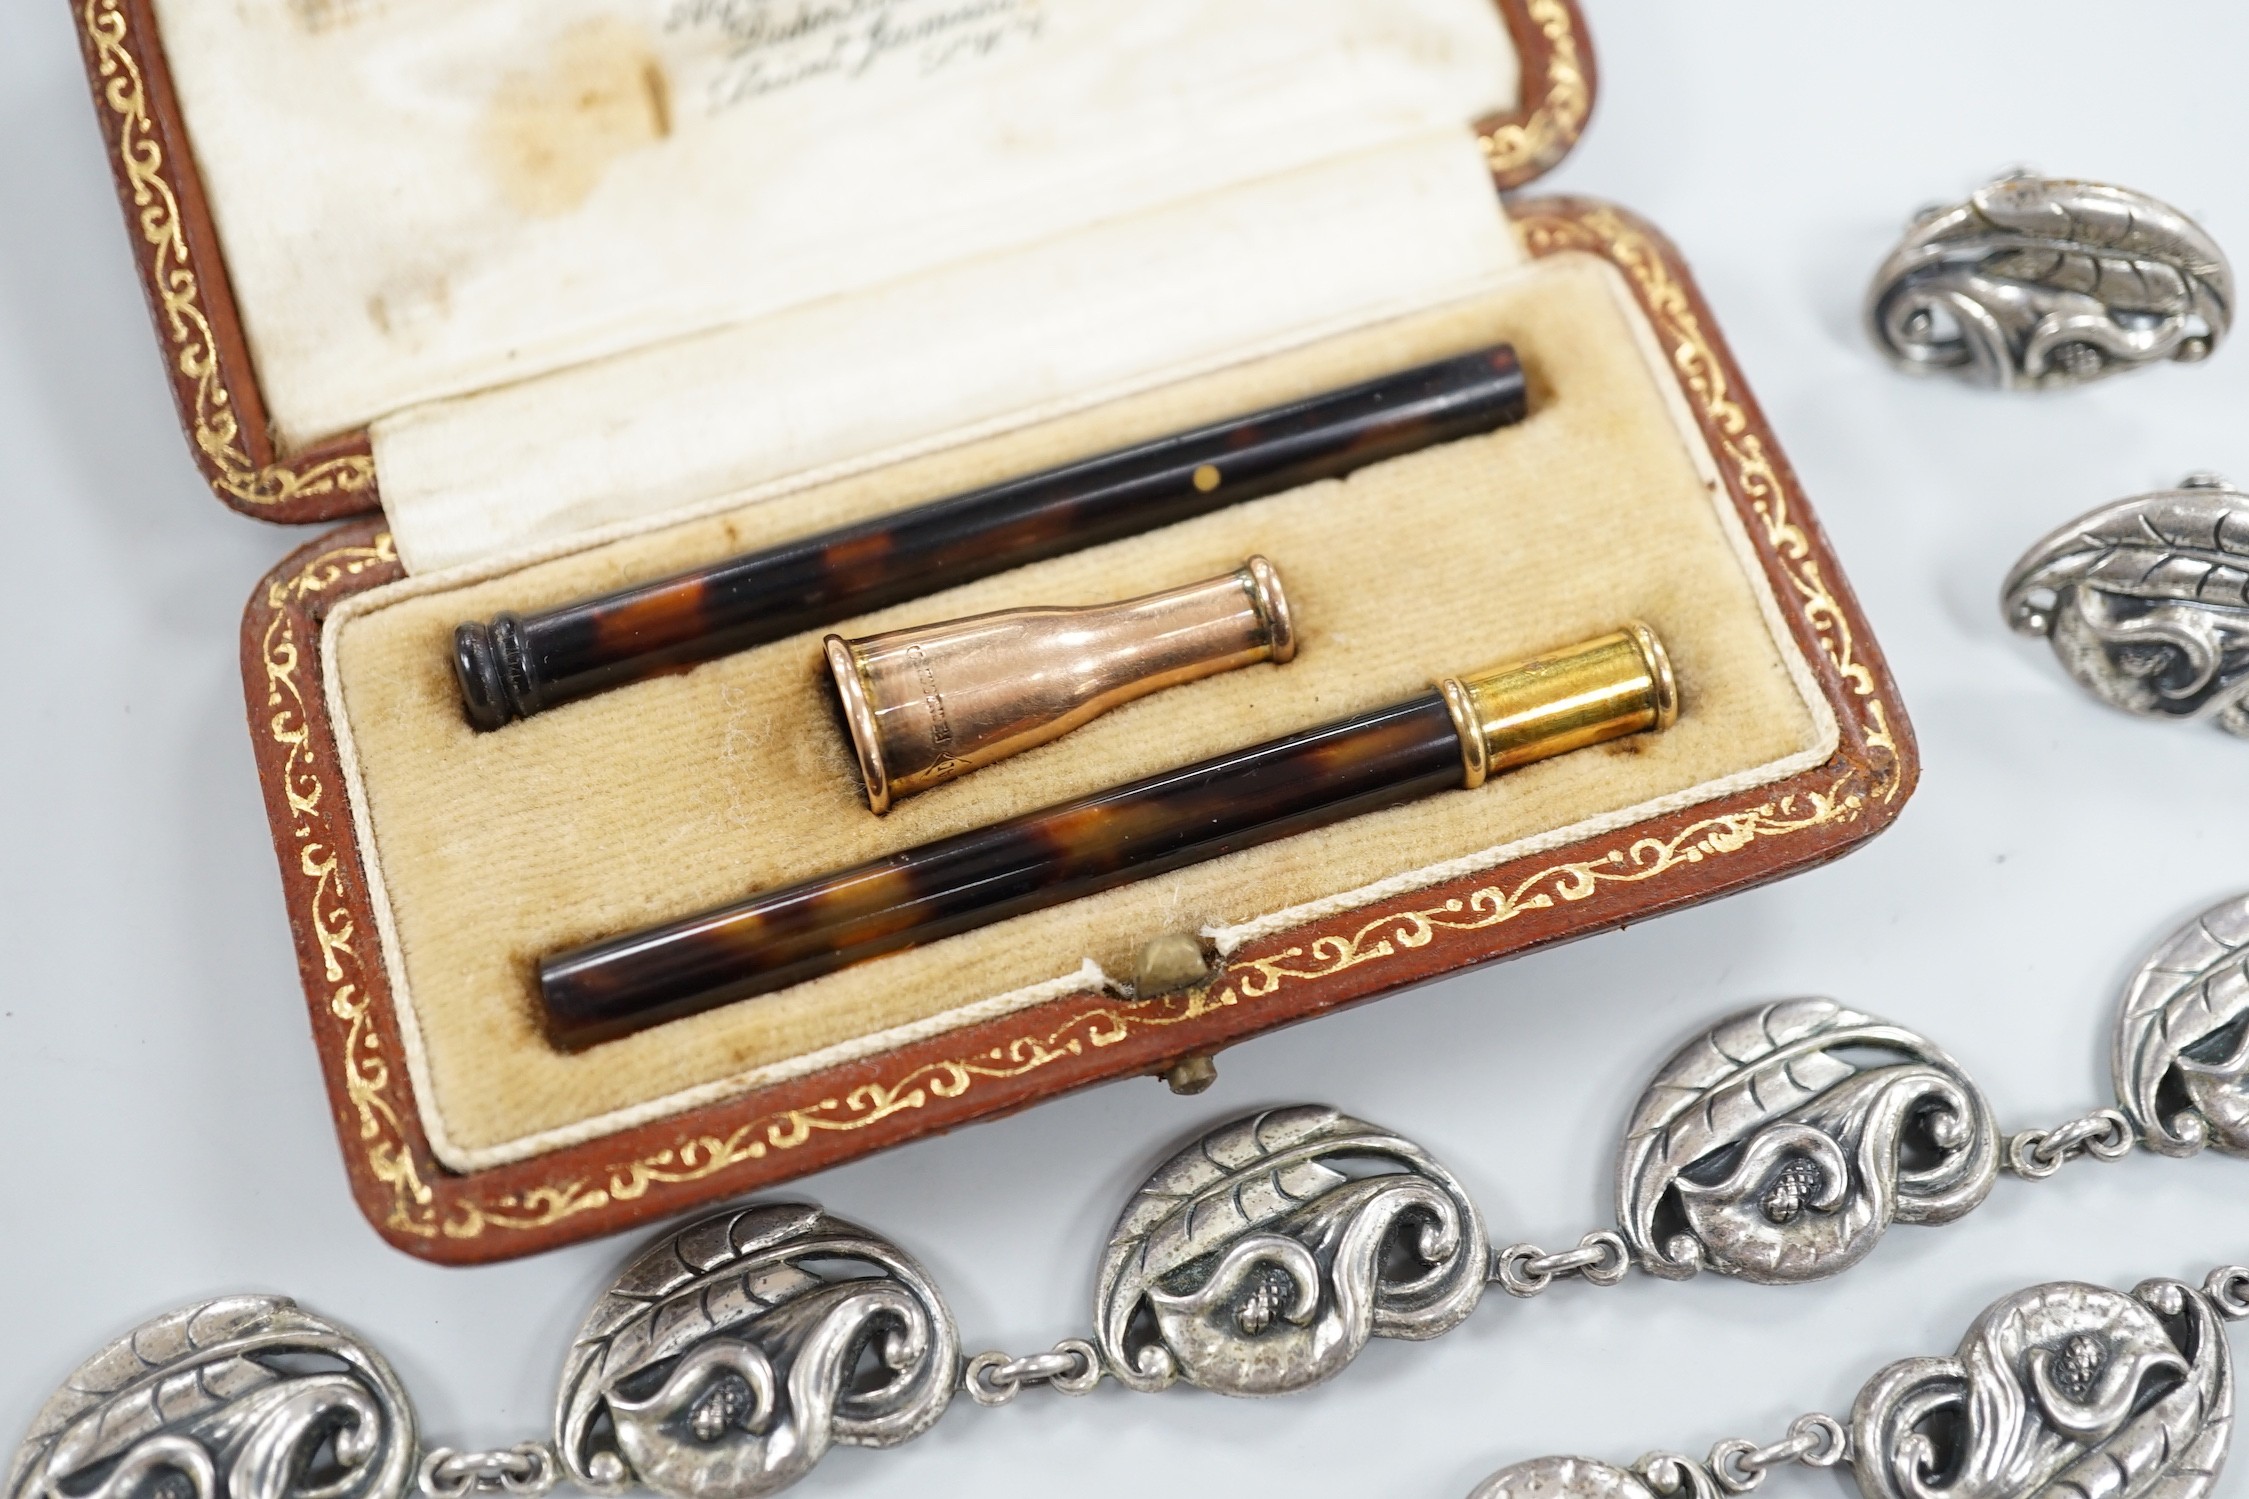 A George V 9ct gold mounted tortoiseshell cigarette holder, by Alfred Dunhill, London, 1922, in original Alfred Dunhill fitted gilt tooled leather box, 8cm, with interchangeable mouthpieces, together with a Danecraft ste